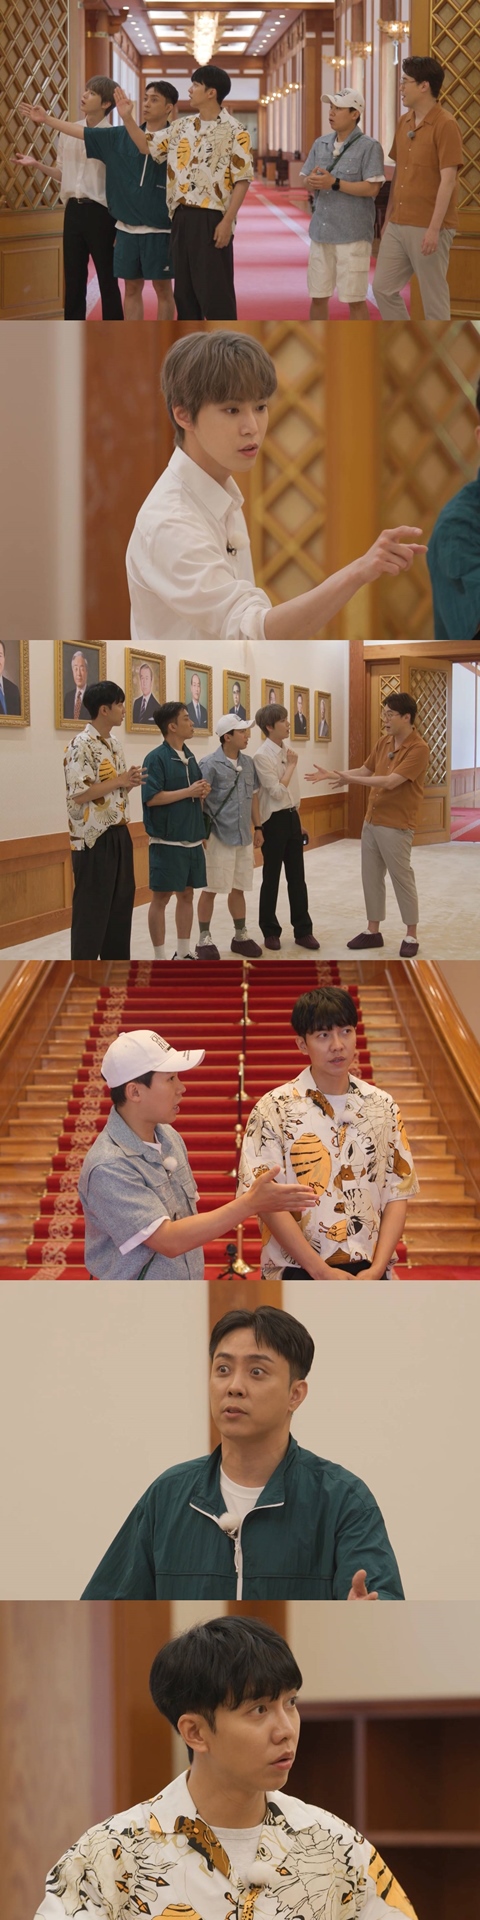 Lee Seung-gi, Yang Se-hyung, Kim Dong-hyun, Eun Ji-won and Doyoung visit Blue House in All The Butlers.On the SBS entertainment program All The Butlers, which will be broadcast on the 3rd, the Blue House opening ceremony and the Blue House of the President will be unveiled.On the same day, members of All The Butlers will be shown visiting Blue House, which has returned to the public after 74 years.For the first time in the broadcast, the entire Blue House will be held, and the Lantern Tour will be held for the people who are curious about Blue House.In addition, historian Shim Yong-hwan will appear to enrich the Lantern tour with a beneficial explanation, and he is expected to reveal all of the history and symbols of Blue House.The members who entered the Blue House main building with Shim Yong-hwan expressed their excitement, saying, I came to the best house in the house.Members who looked around the main building could not stop admiring the portraits of the past presidents in Sejongsil, the first place to be released on the air.In addition, the members visited the space where the history of the past was used by the president and had time to feel some of the presidents life.All The Butlers was the first entertainment company to introduce the entire Gyeongbokgung to the inside of the Gyeongjeongjeon and the second floor of Gyeonghoeru.Especially, it conveyed the heartbreaking history of the well-known Gyeongbokgung and received a favorable reputation for catching both fun and meaning.Blue House, which will be unveiled for the first time in entertainment at All The Butlers following Gyeongbokgung, is expected to look like.It airs at 6:30 p.m. on the 3rd.SBS is provided.